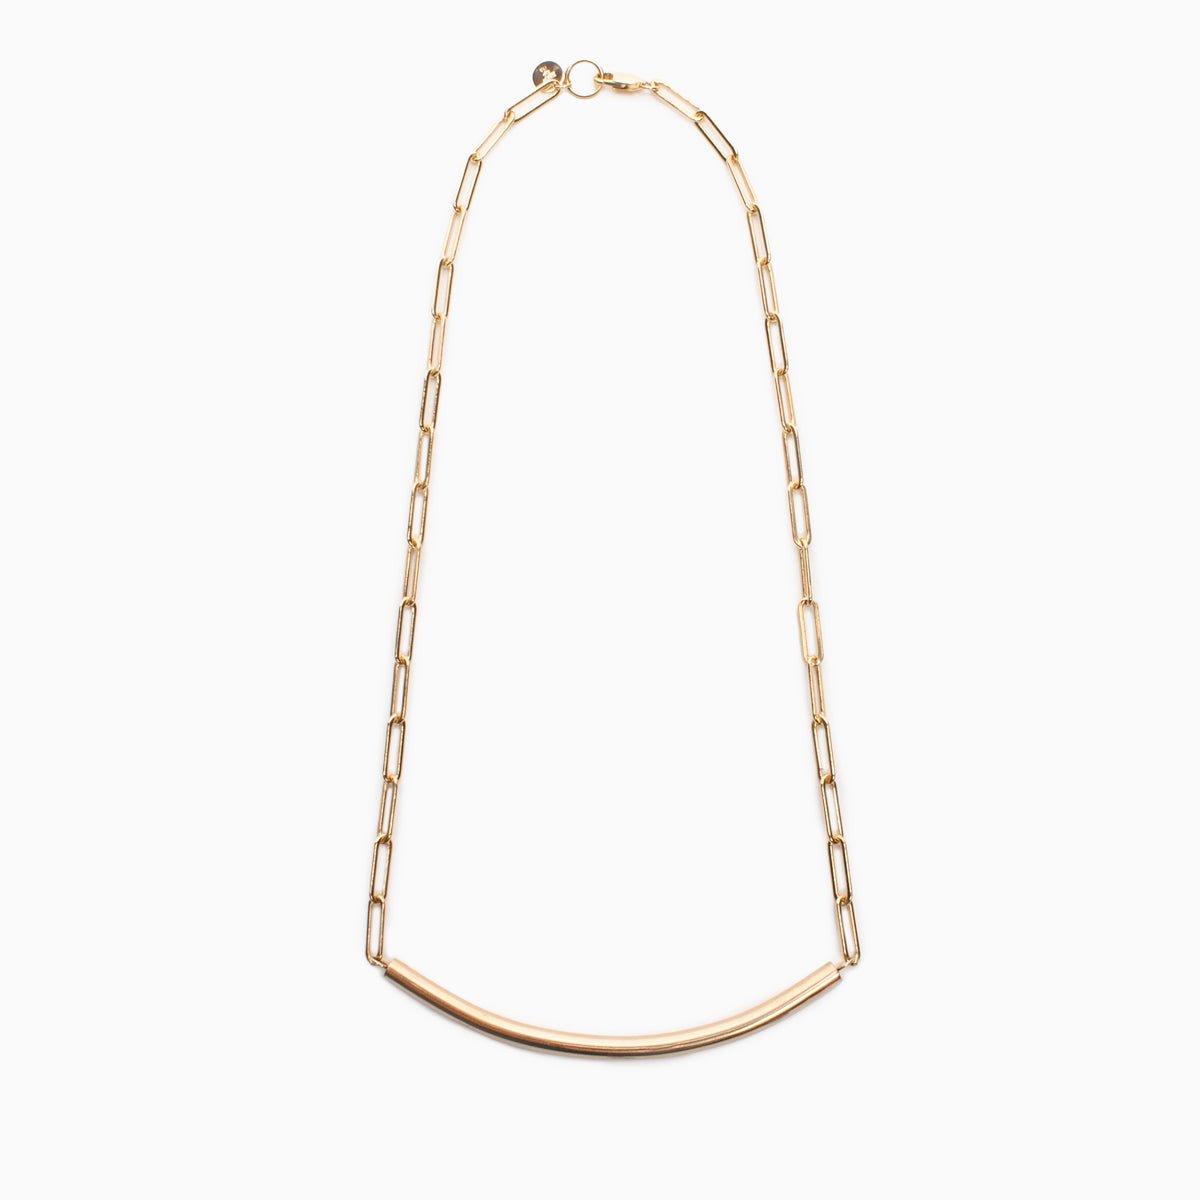 A gold fill chain necklace with a cylindrical curved focal bar. The Virada Necklace is Designed and handcrafted in Portland, Oregon.